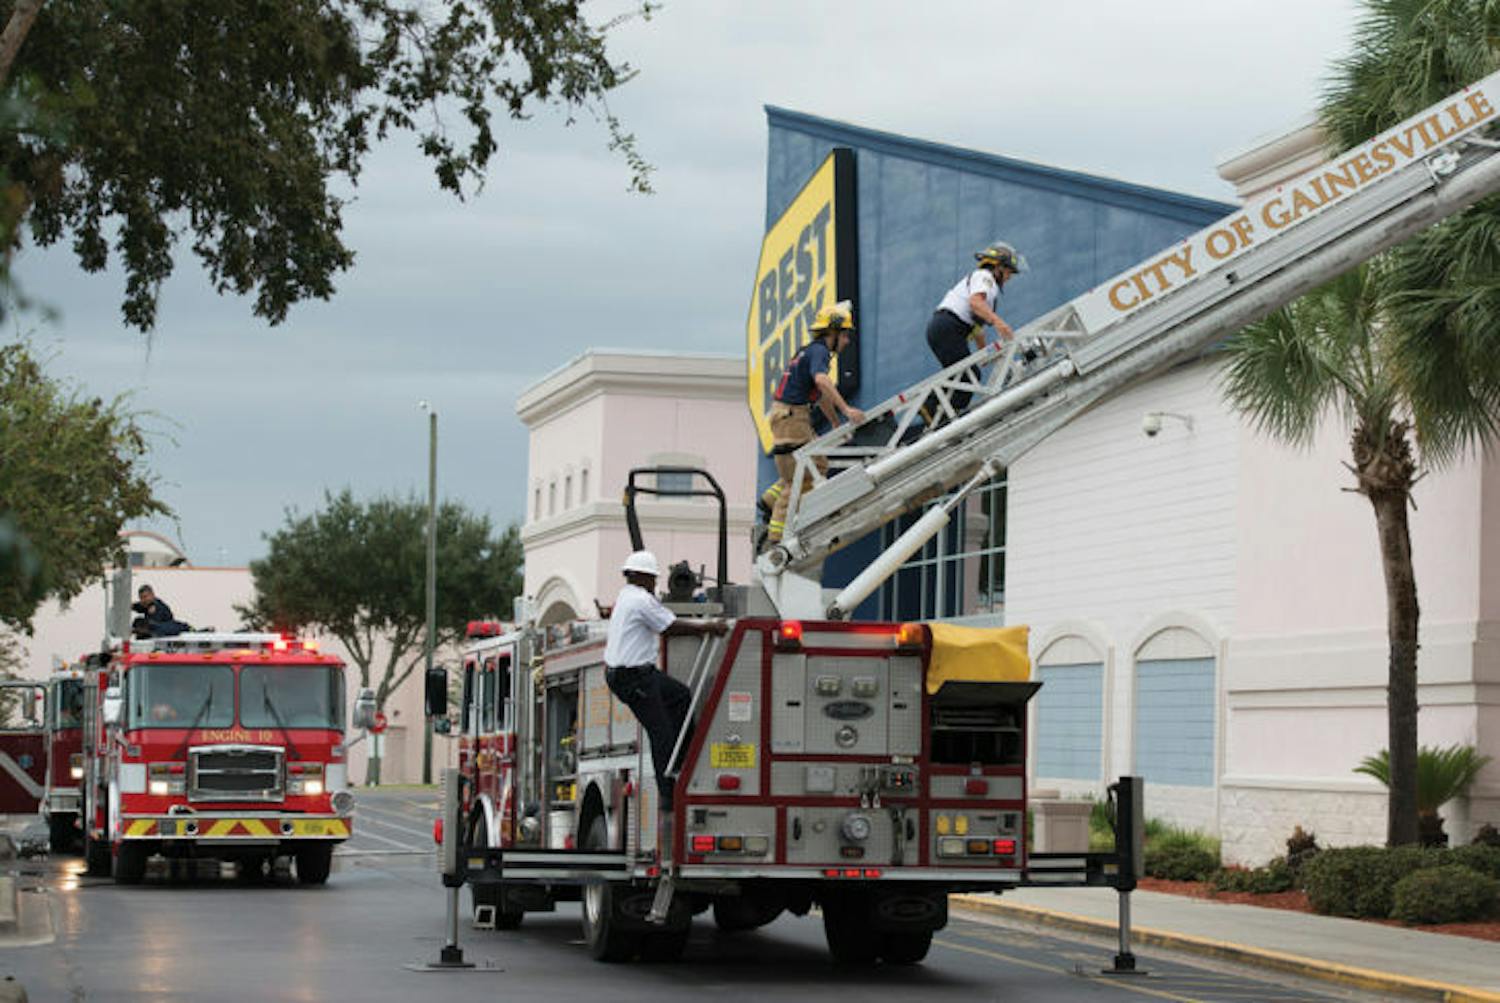 Gainesville Fire Rescue works to put out a fire on about 60 of the solar panels of a Butler Plaza Best Buy storage unit. The cause of the fire is under investigation.